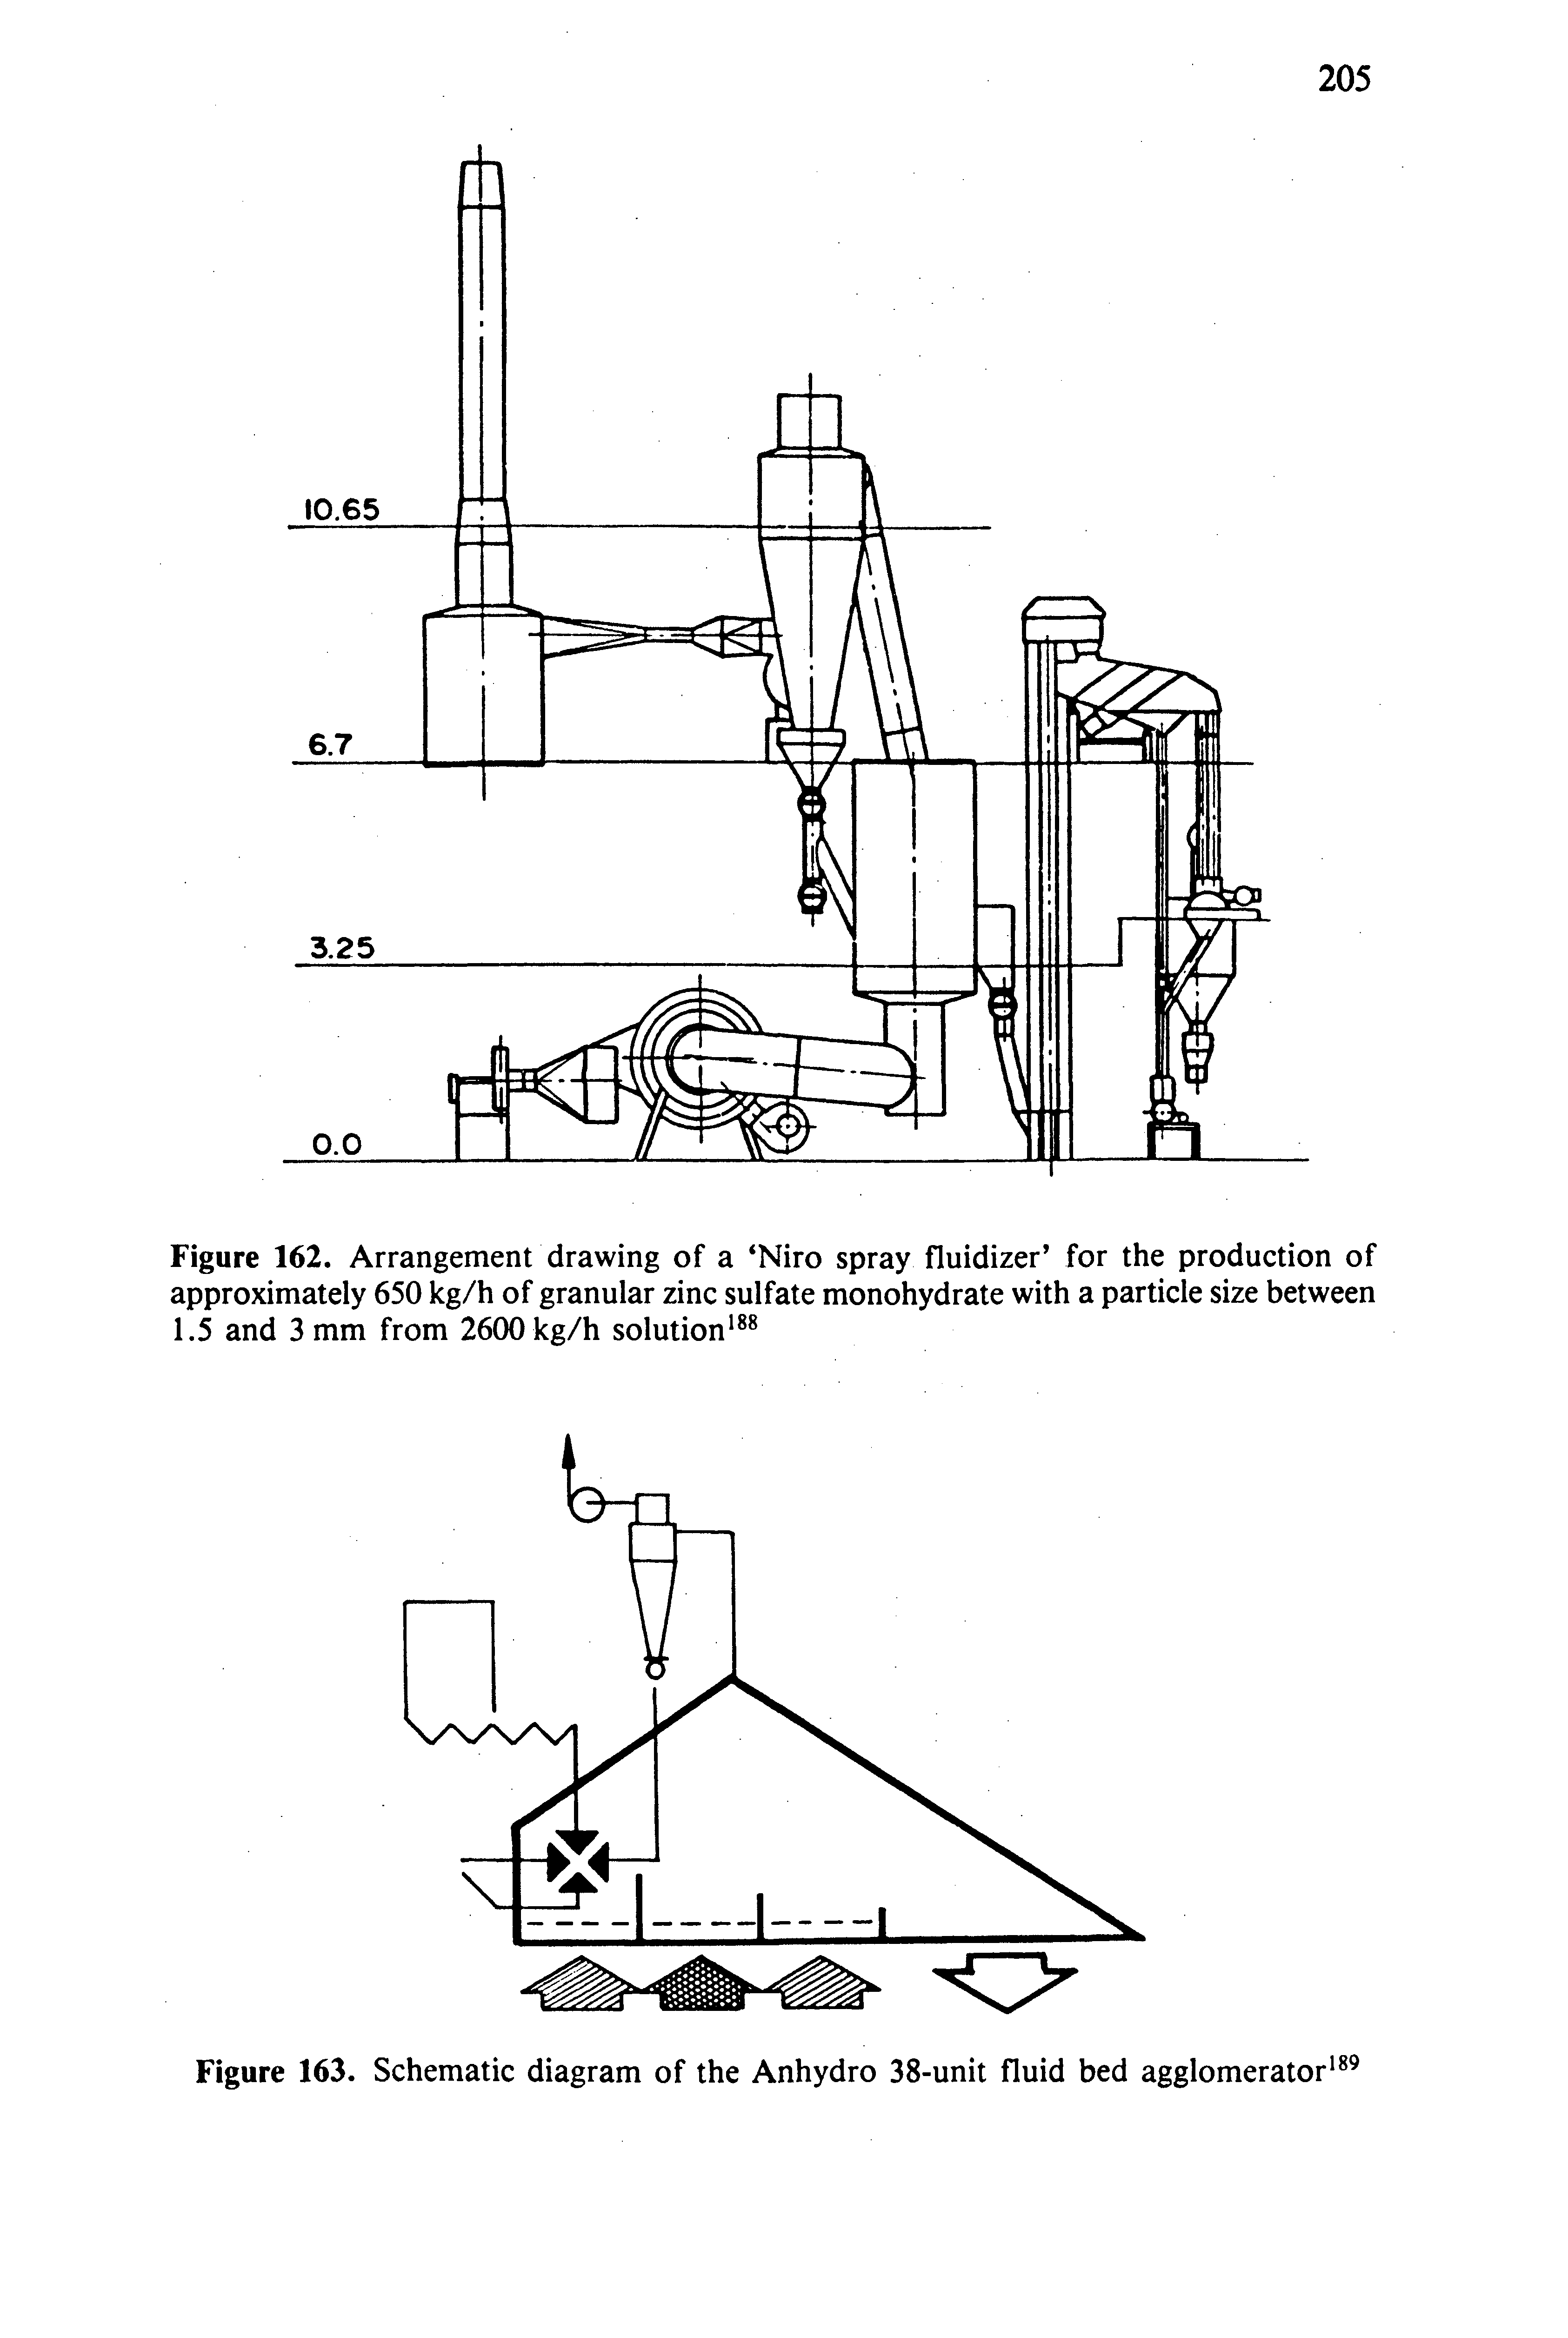 Figure 162. Arrangement drawing of a Niro spray fluidizer for the production of approximately 650 kg/h of granular zinc sulfate monohydrate with a particle size between 1.5 and 3 mm from 2600 kg/h solution ...